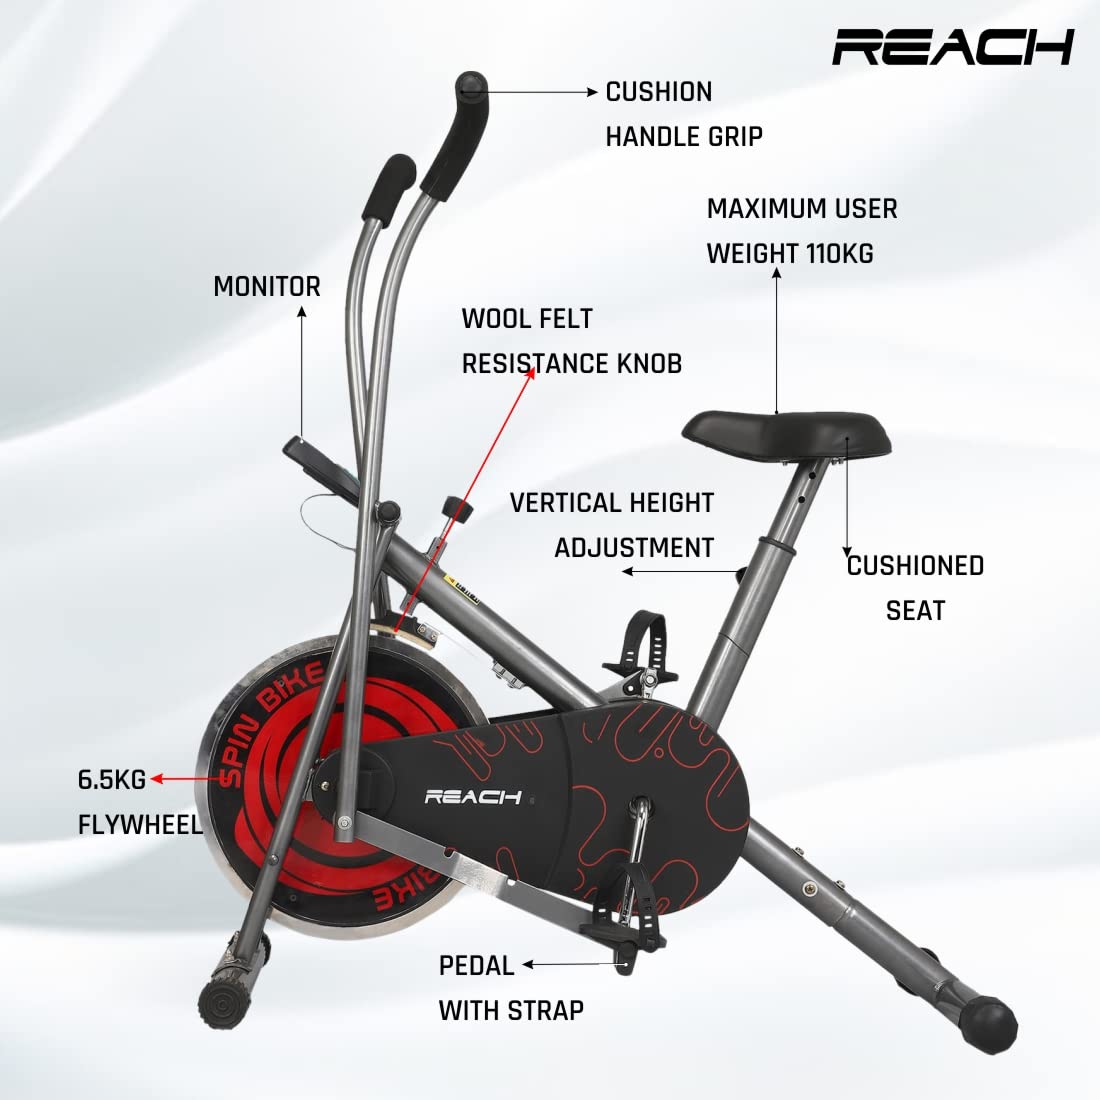 ELEV8 by Reach SB-200 Upright Spin Bike With 6.5 KG Flywheel | Exercise Cycle With Adjustable Resistance & LCD Display | For Home Gym Workout & Cardio | Max User Weight 110kgs | 12 Months Warranty